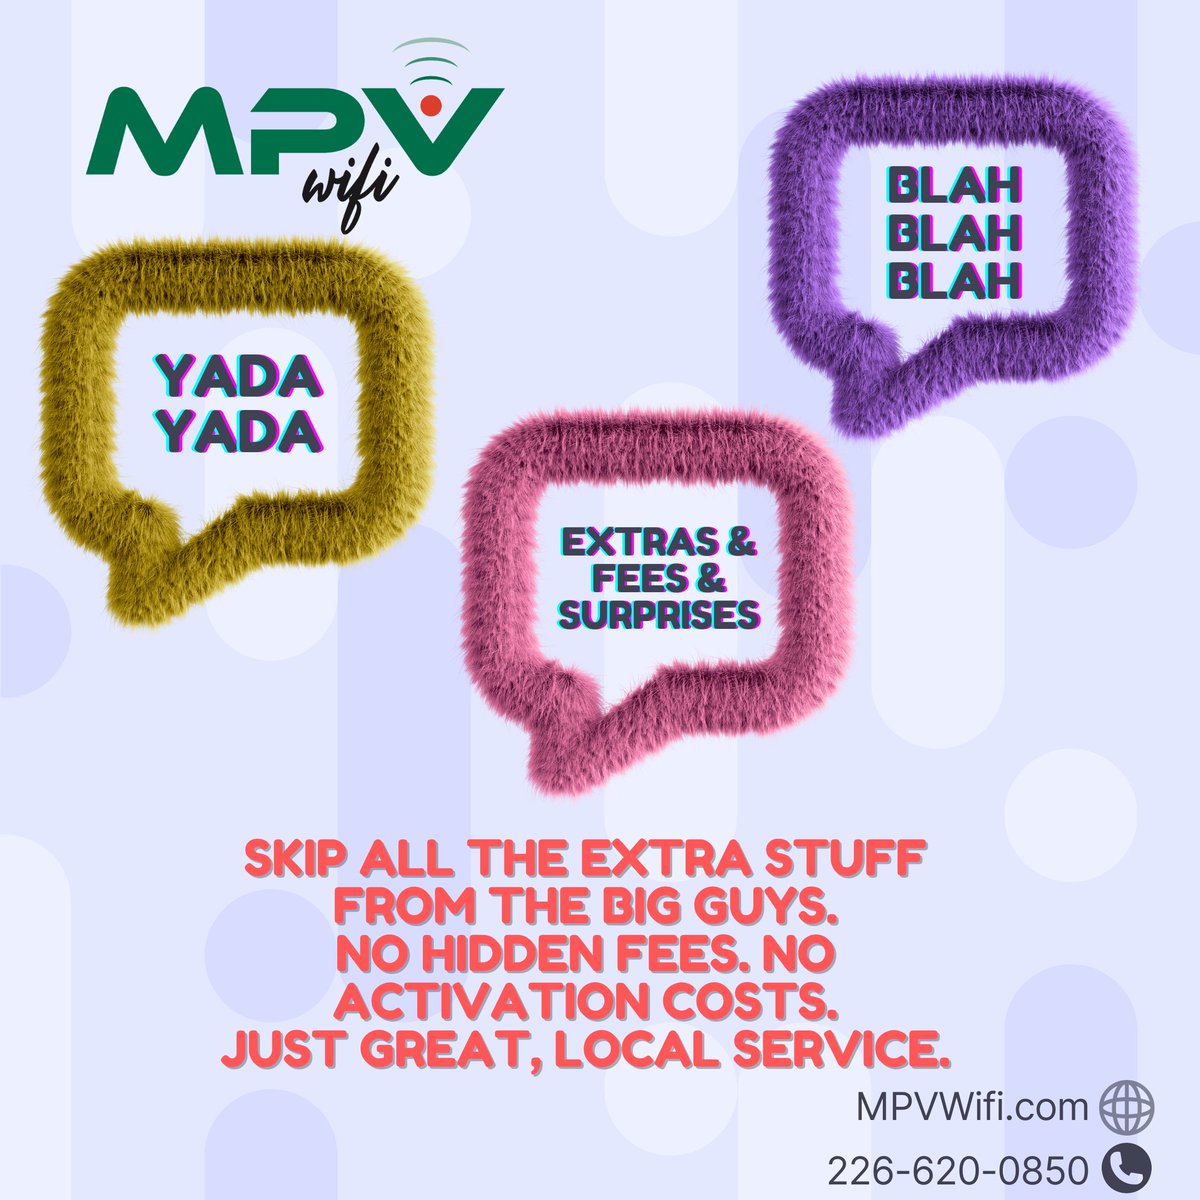 Skip all the extras and enjoy easy, affordable pricing with no hidden fees. Sign up for MPV Wifi's home internet or TV & internet bundles and enjoy great, local service without all the blah blah blah!